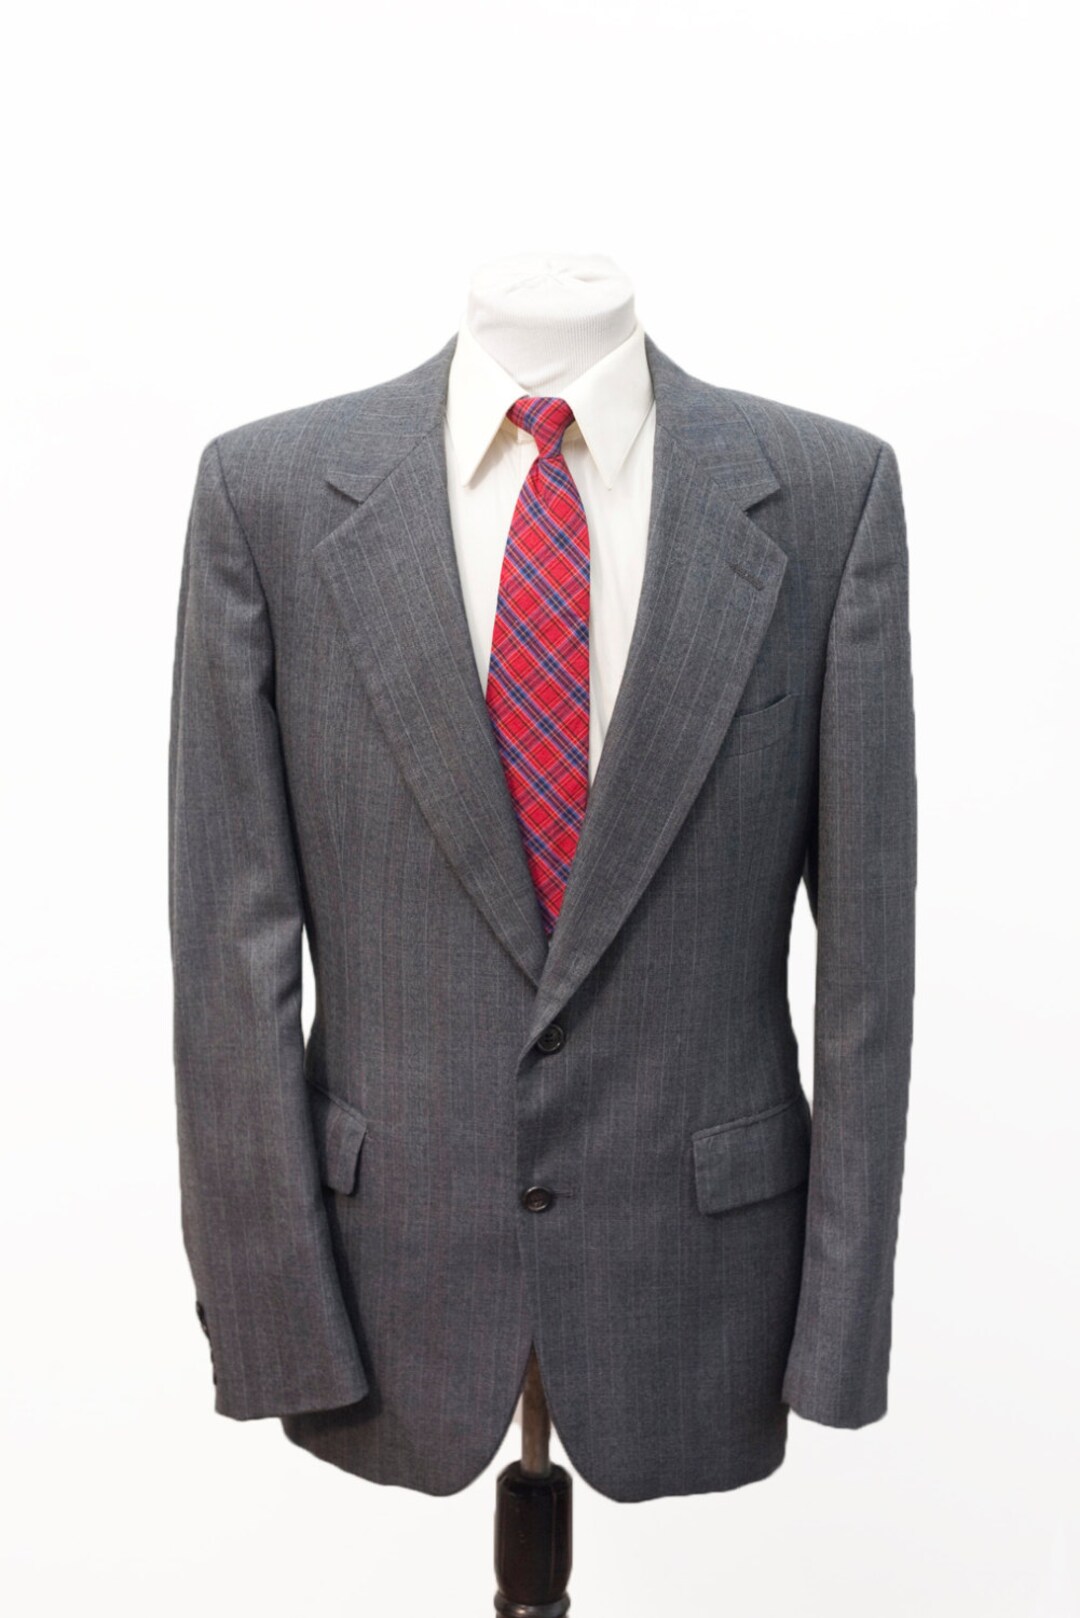 Men's Suit / Vintage Grey Blazer and Trousers by Bill - Etsy